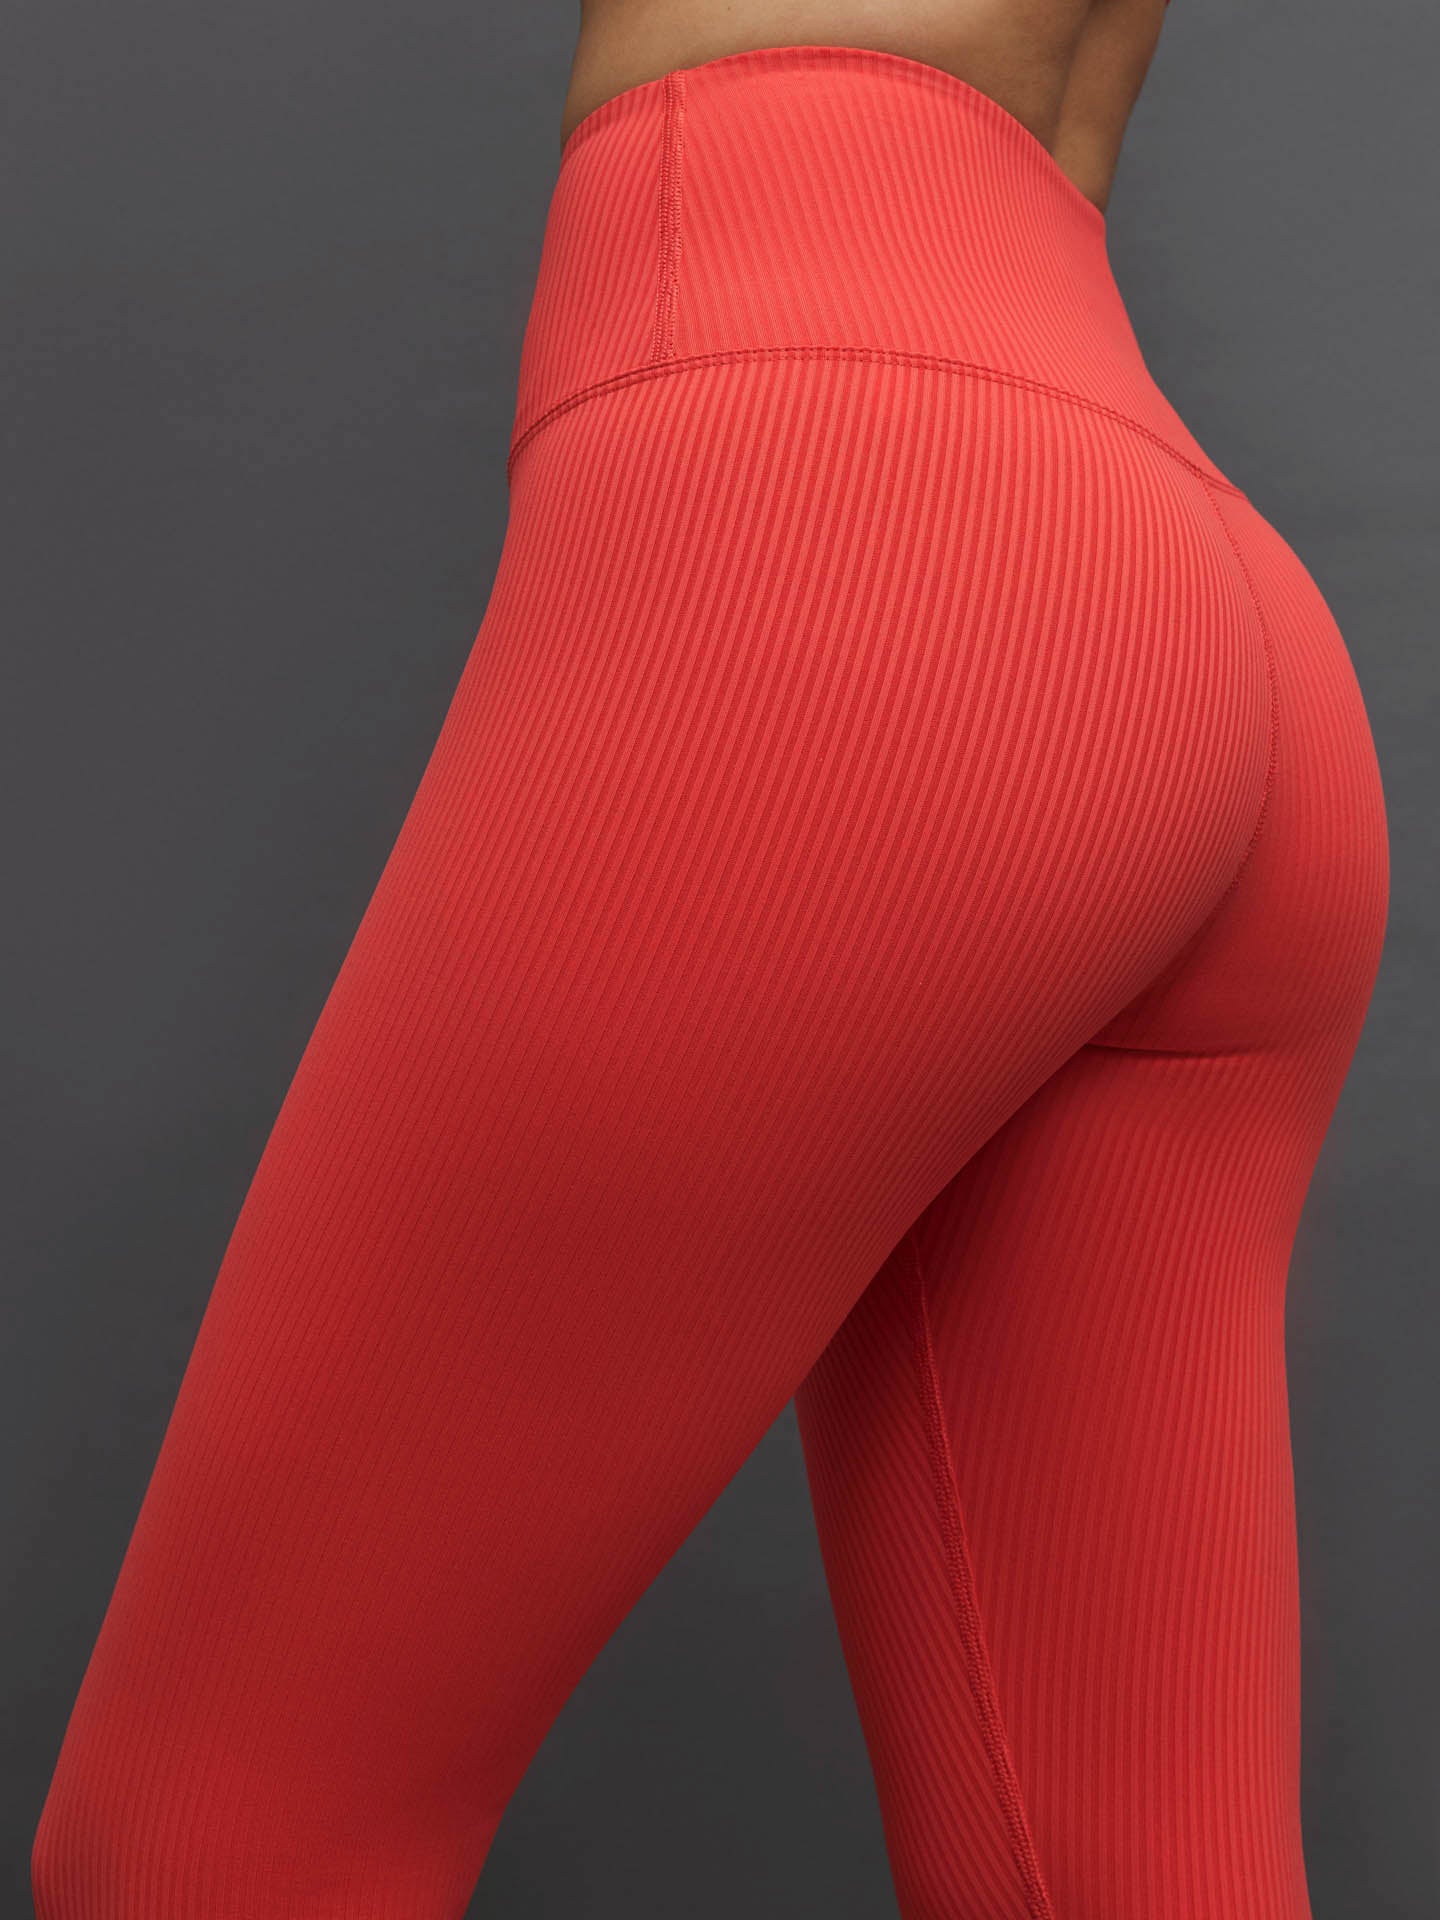 Carbon38 Ribbed 7/8 Legging In Cayenne In Red